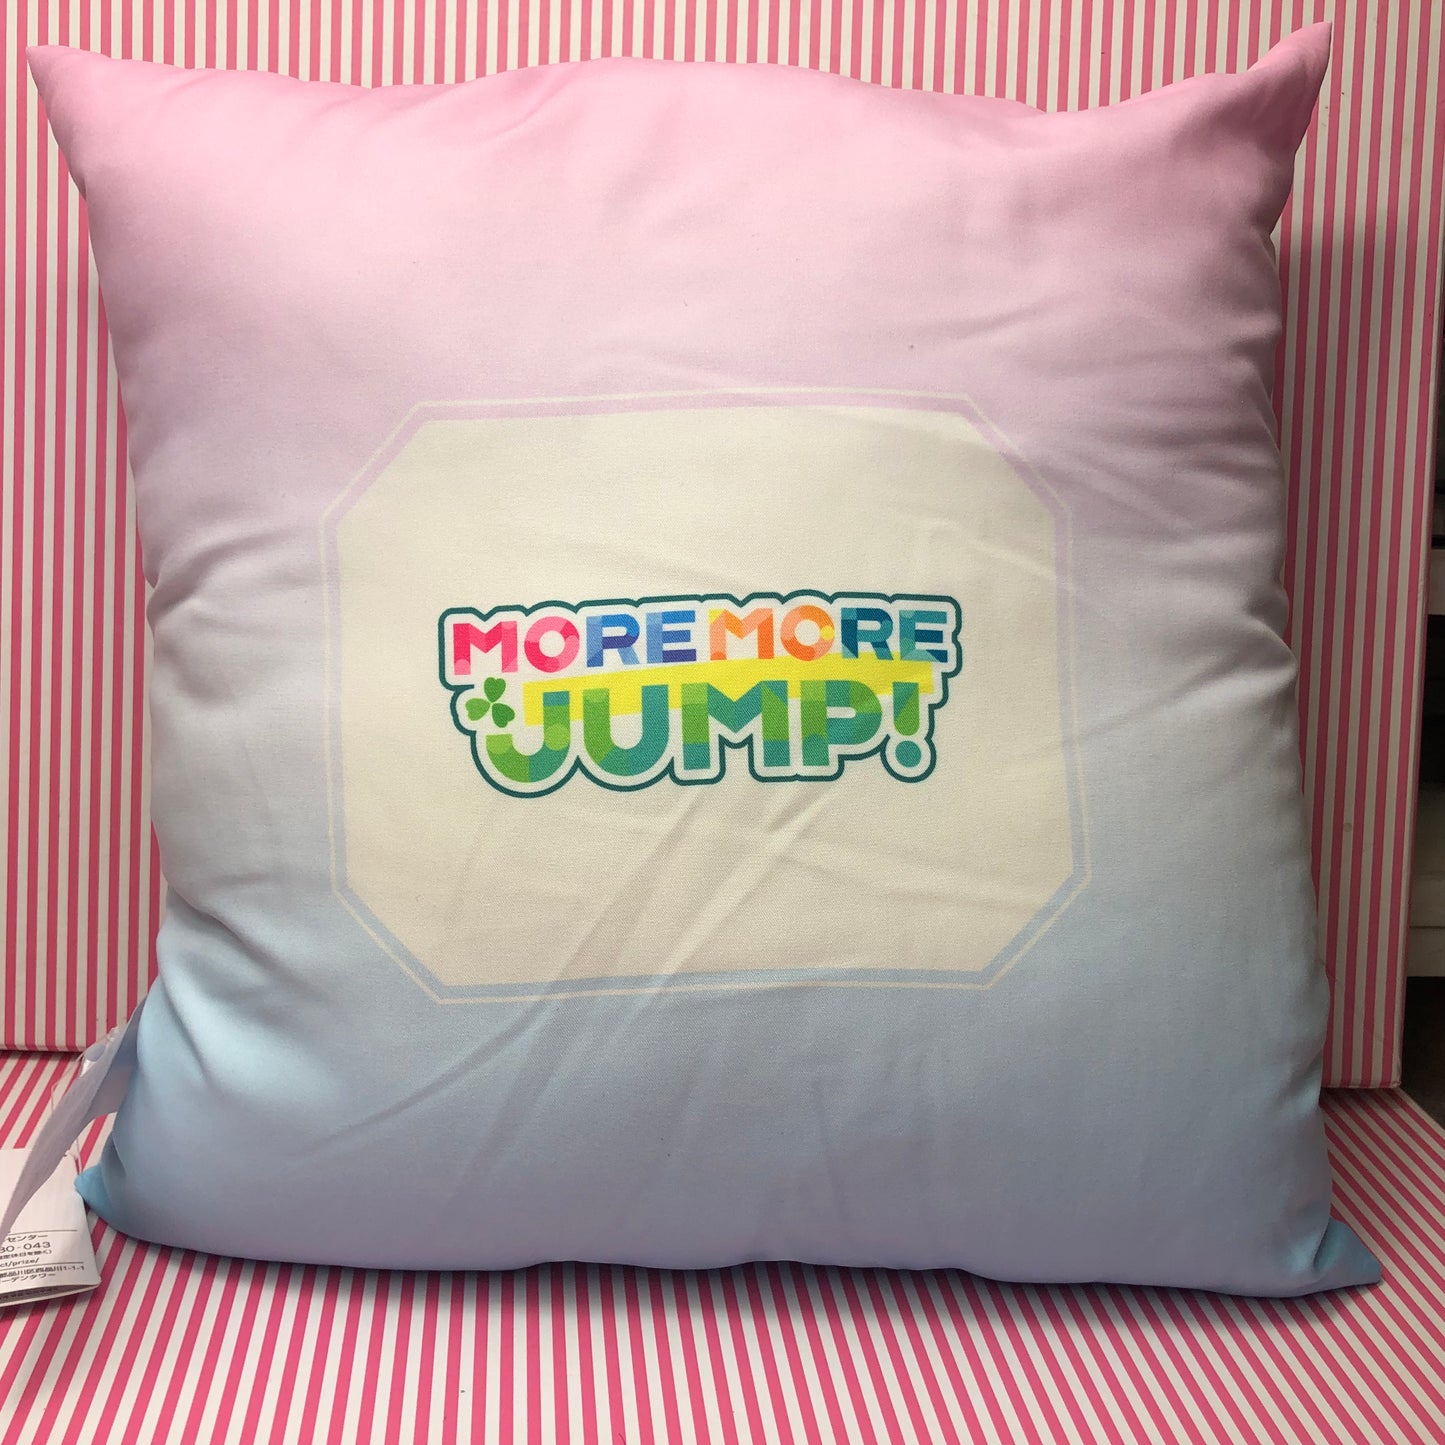 Project Sekai Colorful Stage Cushion! ft. Hatsune Miku - More More Jump! Color of Drops